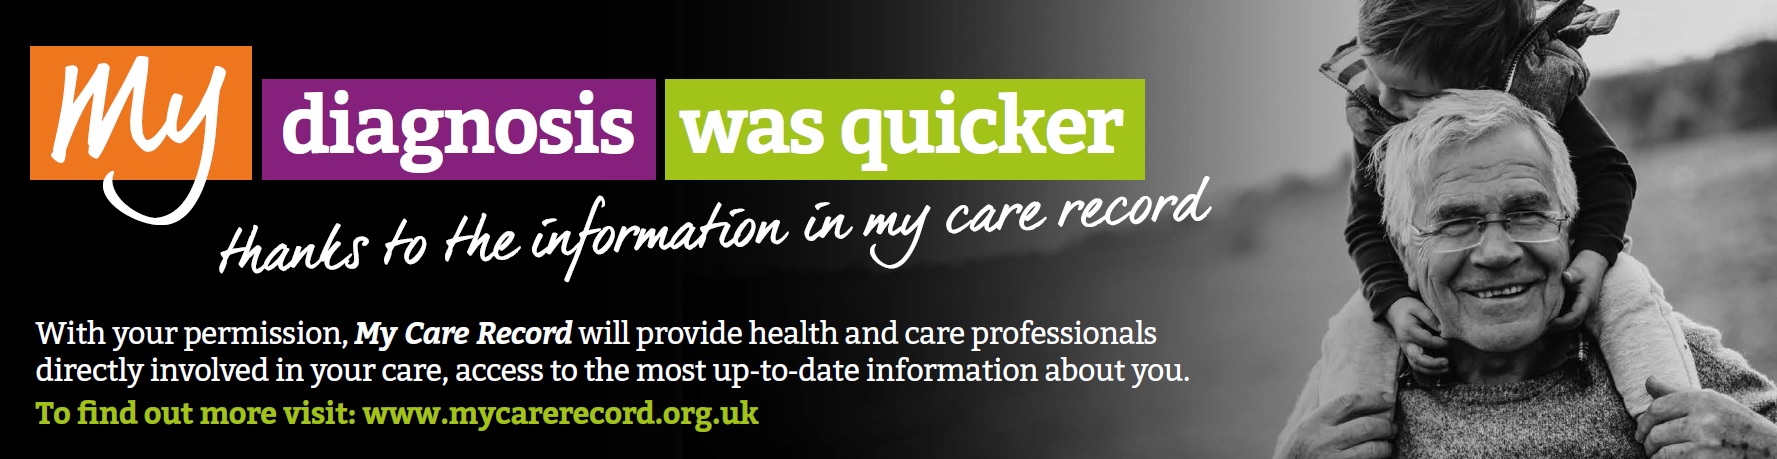 My diagnosis was quicker thanks to the information in my care record. With your permission, my care record will provide health and care professionals directly involved in your care access to the most up to date information about you. To find out more visit www.mycarerecord.org.uk